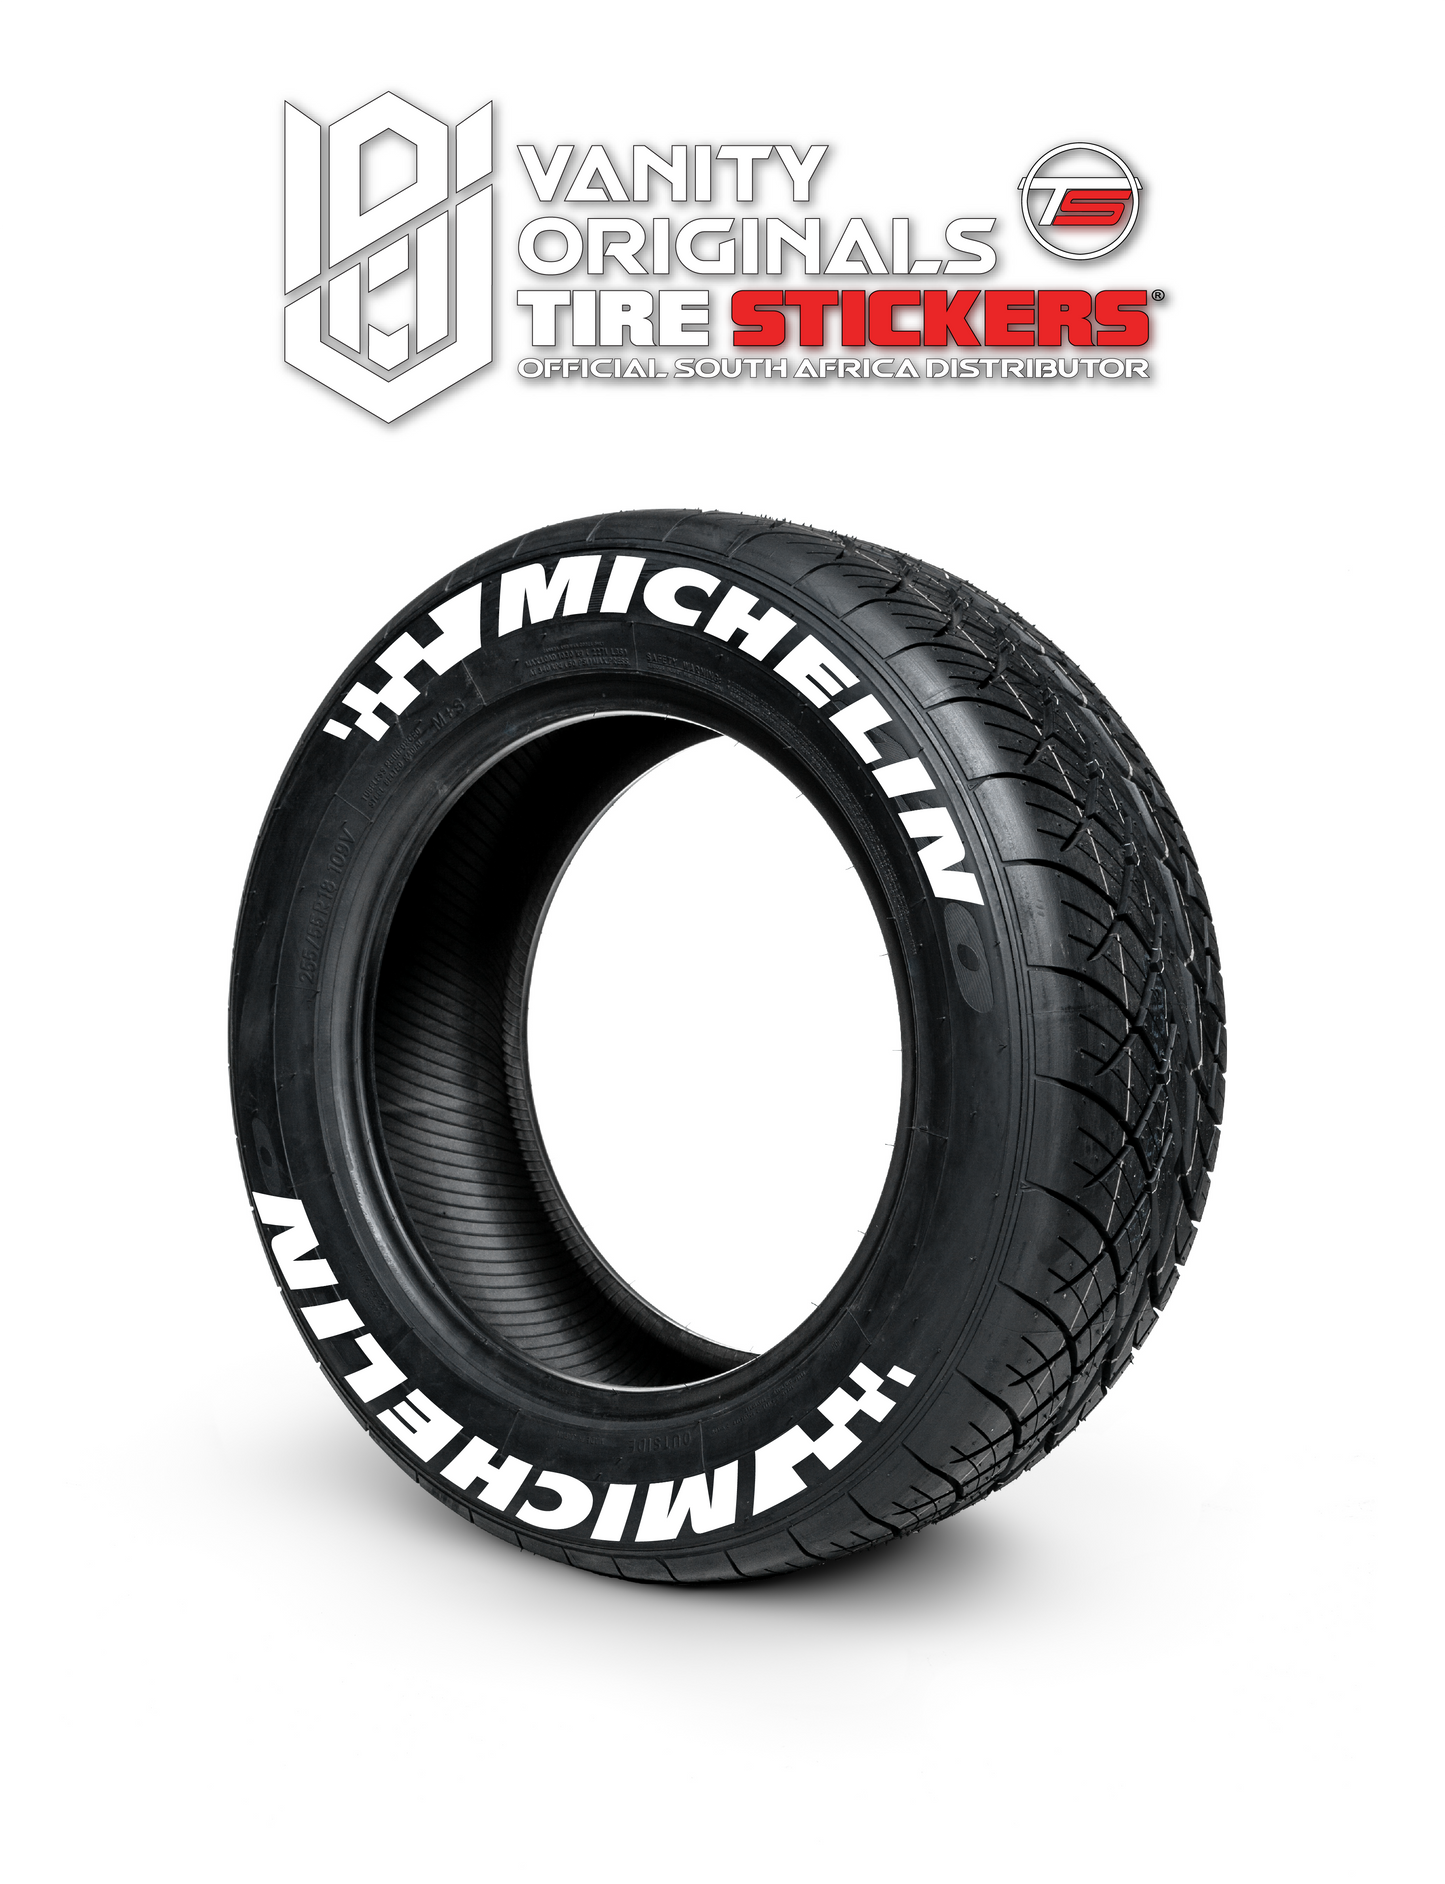 Michelin Flag ( 8x Rubber Decals, Adhesive & Instructions Included )